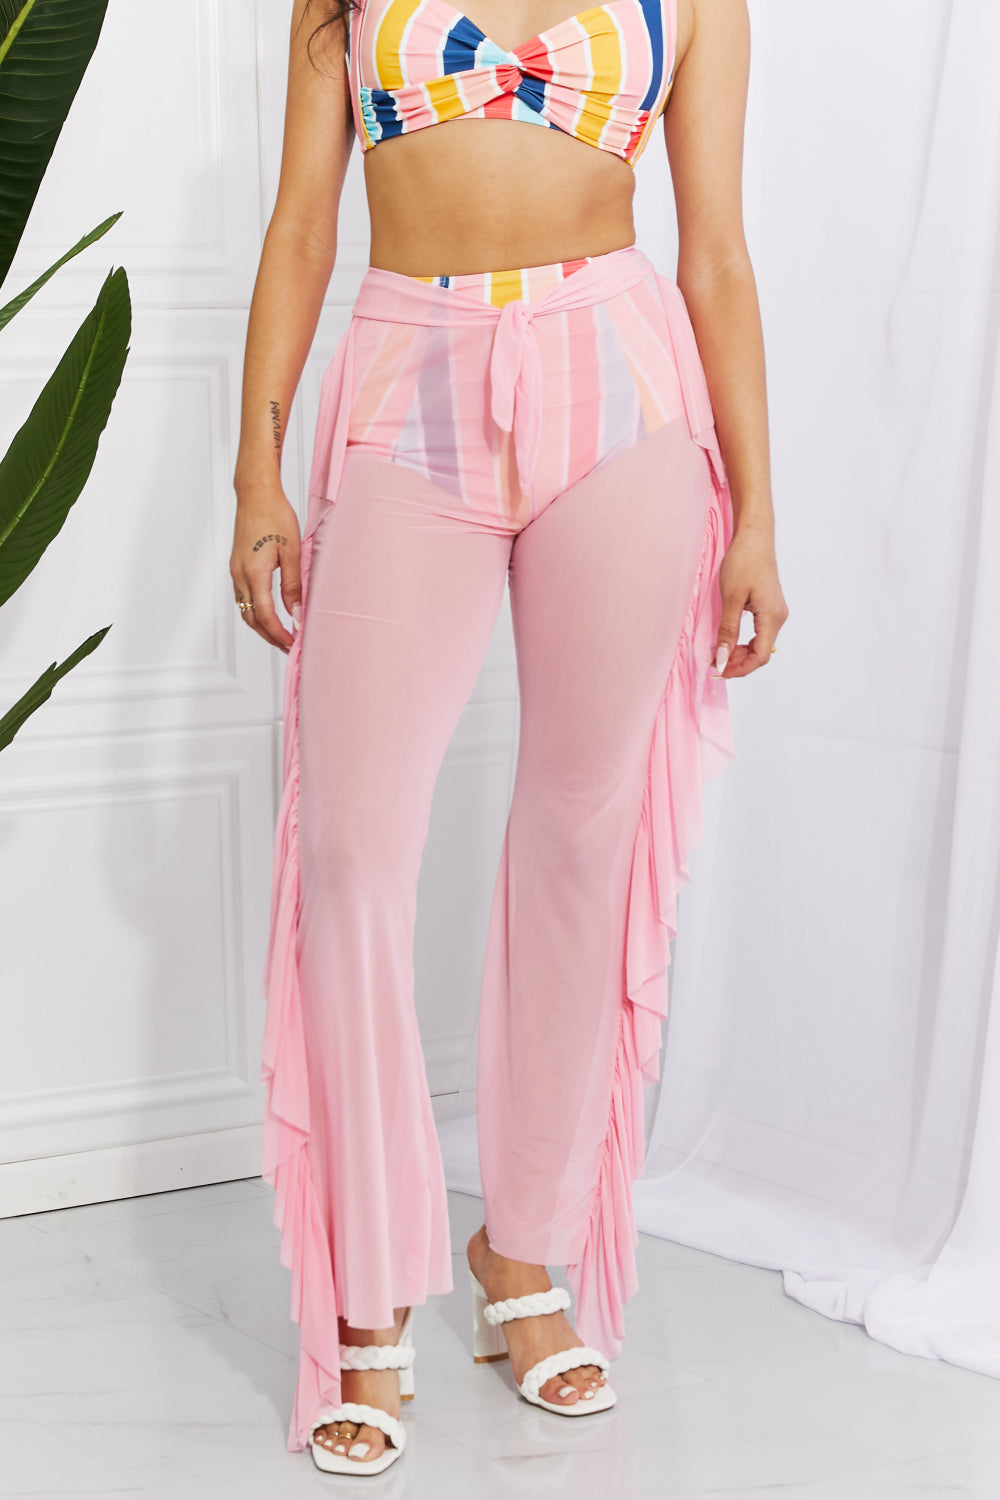 Marina West Swim Take Me To The Beach Mesh Ruffle Cover-Up Pants-Trendsi-Blush Pink-One Size-[option4]-[option5]-[option6]-[option7]-[option8]-Shop-Boutique-Clothing-for-Women-Online